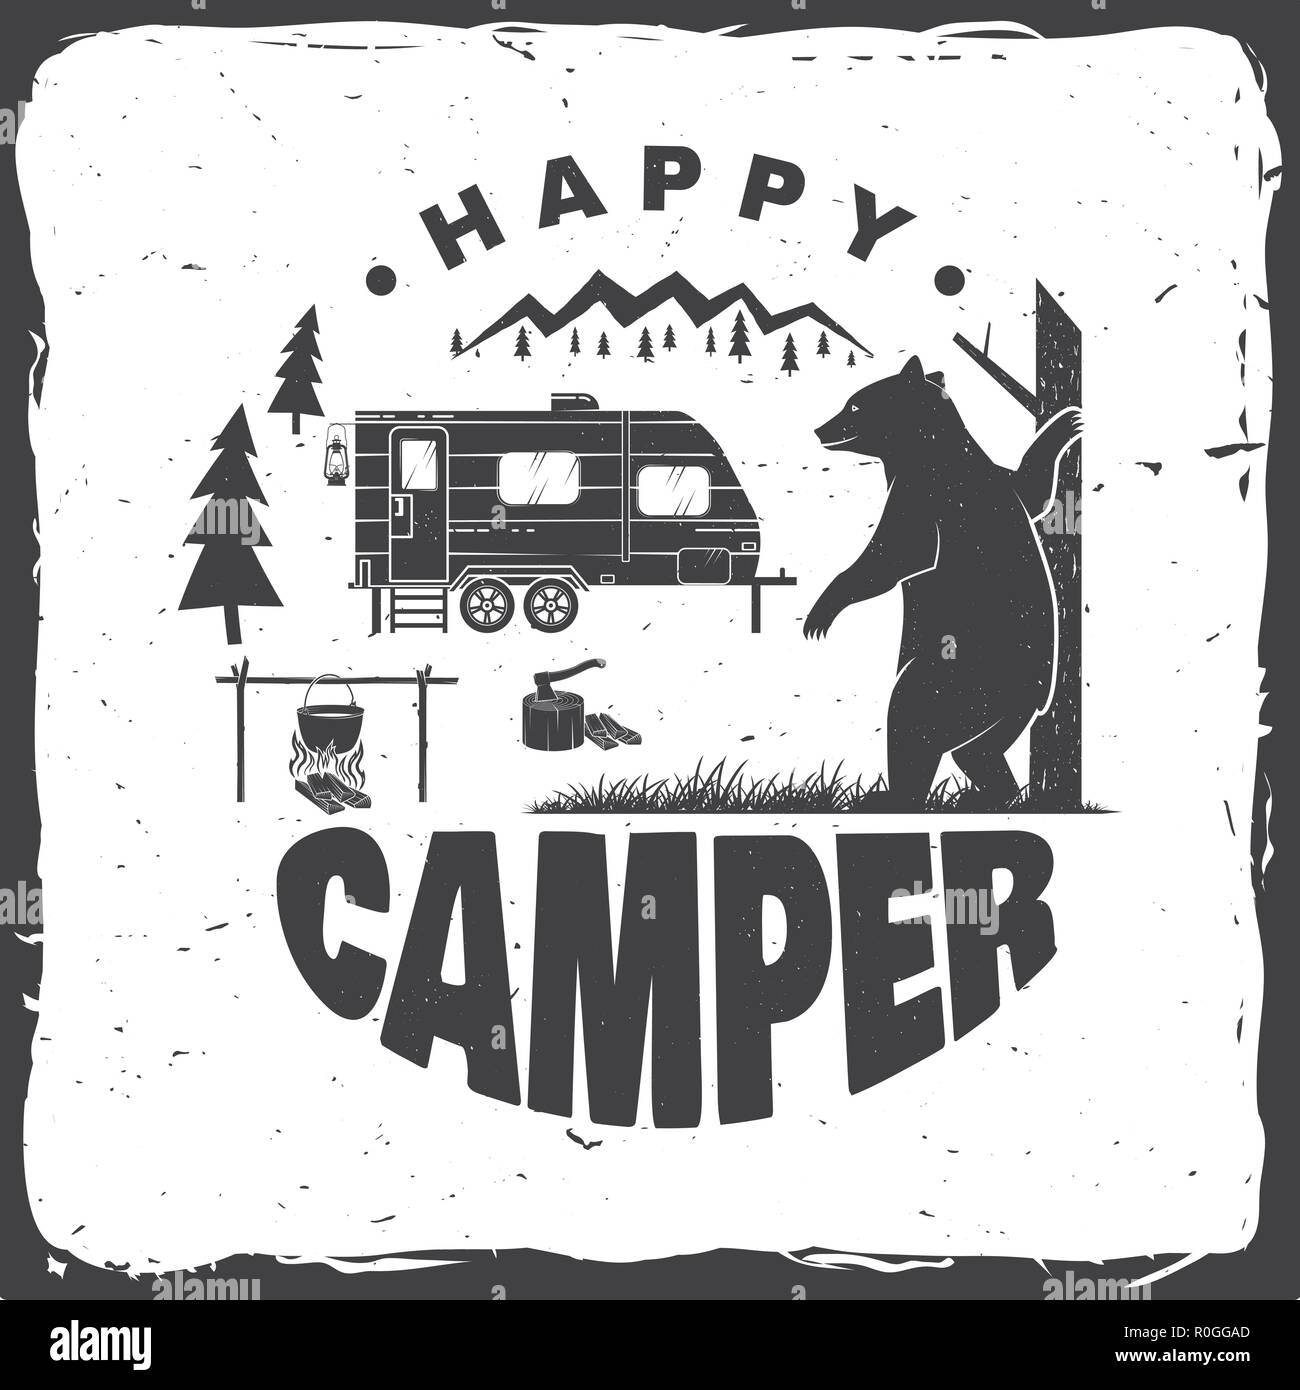 Happy camper. Vector illustration. Concept for shirt or logo, print, stamp or tee. Vintage typography design with camping trailer, bear, campfire and forest silhouette. Stock Vector